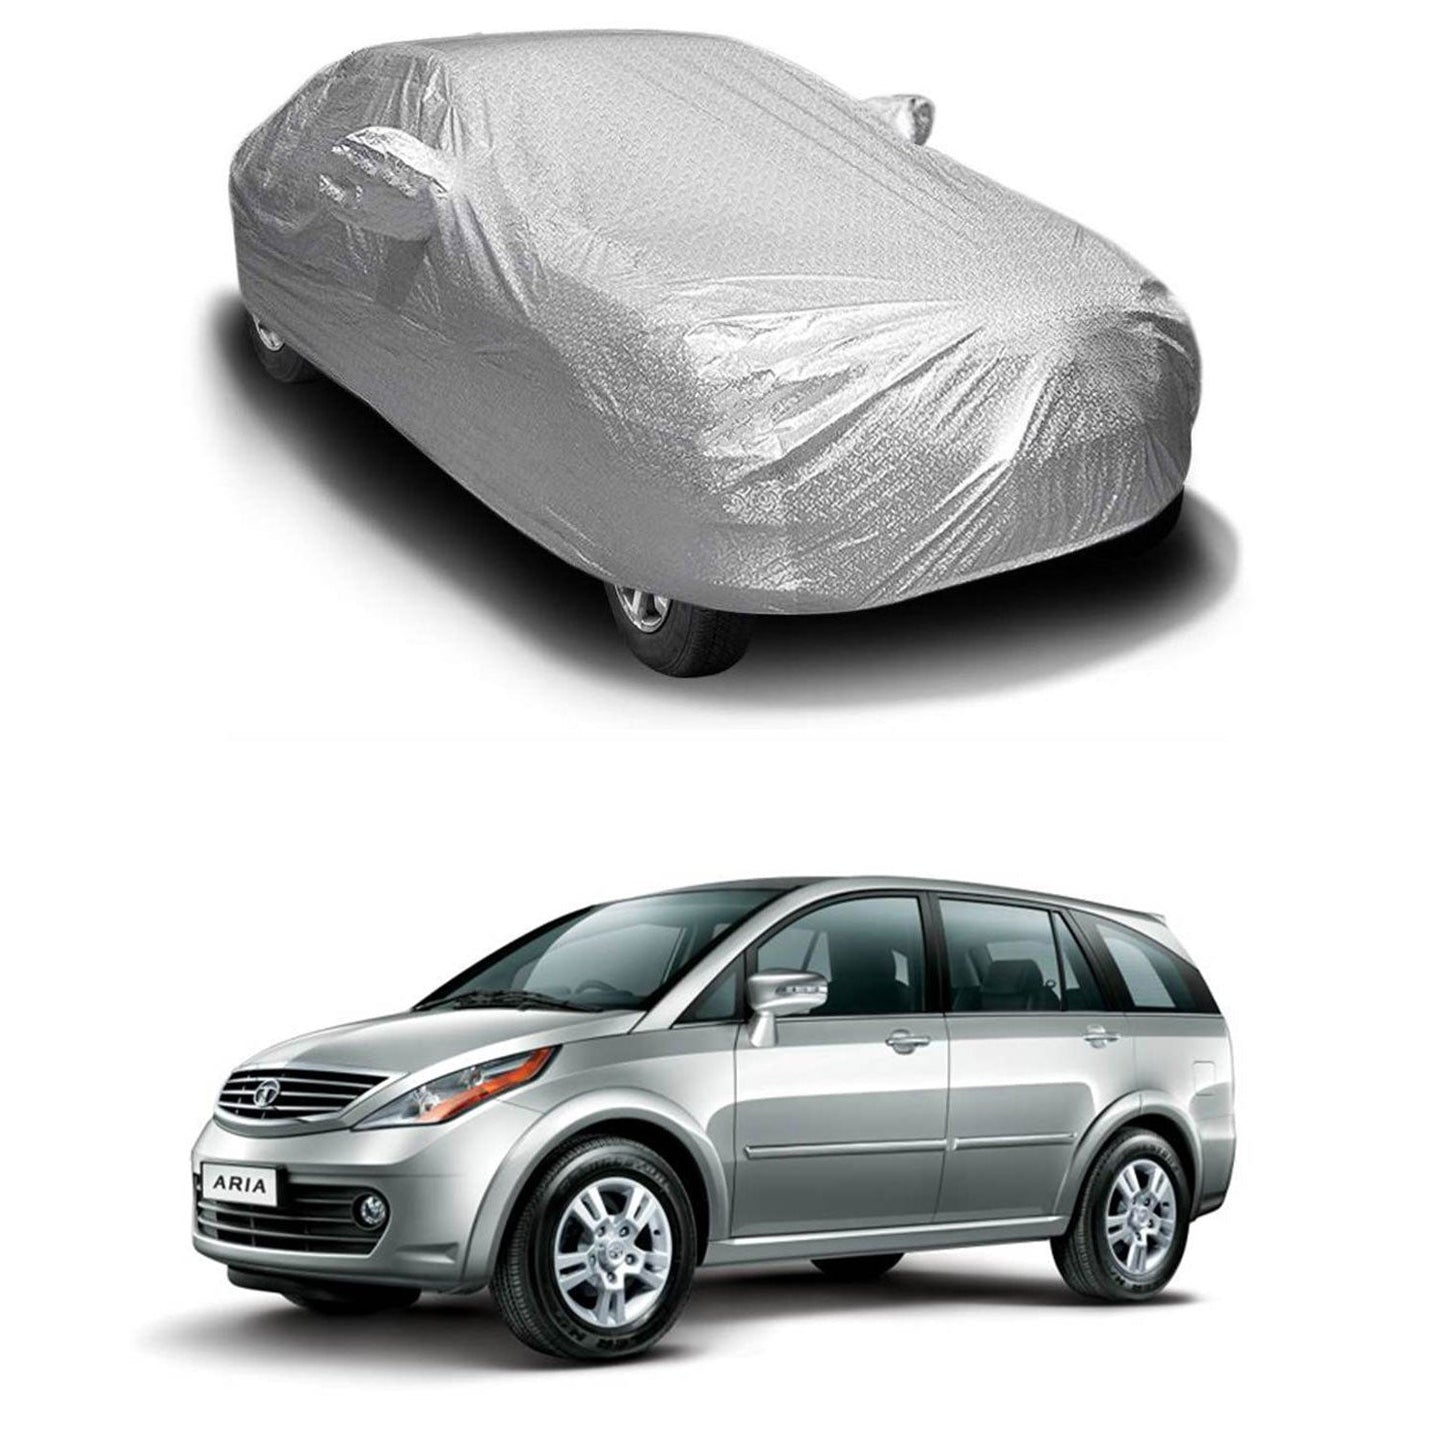 Oshotto Spyro Silver Anti Reflective, dustproof and Water Proof Car Body Cover with Mirror Pockets For Tata Aria